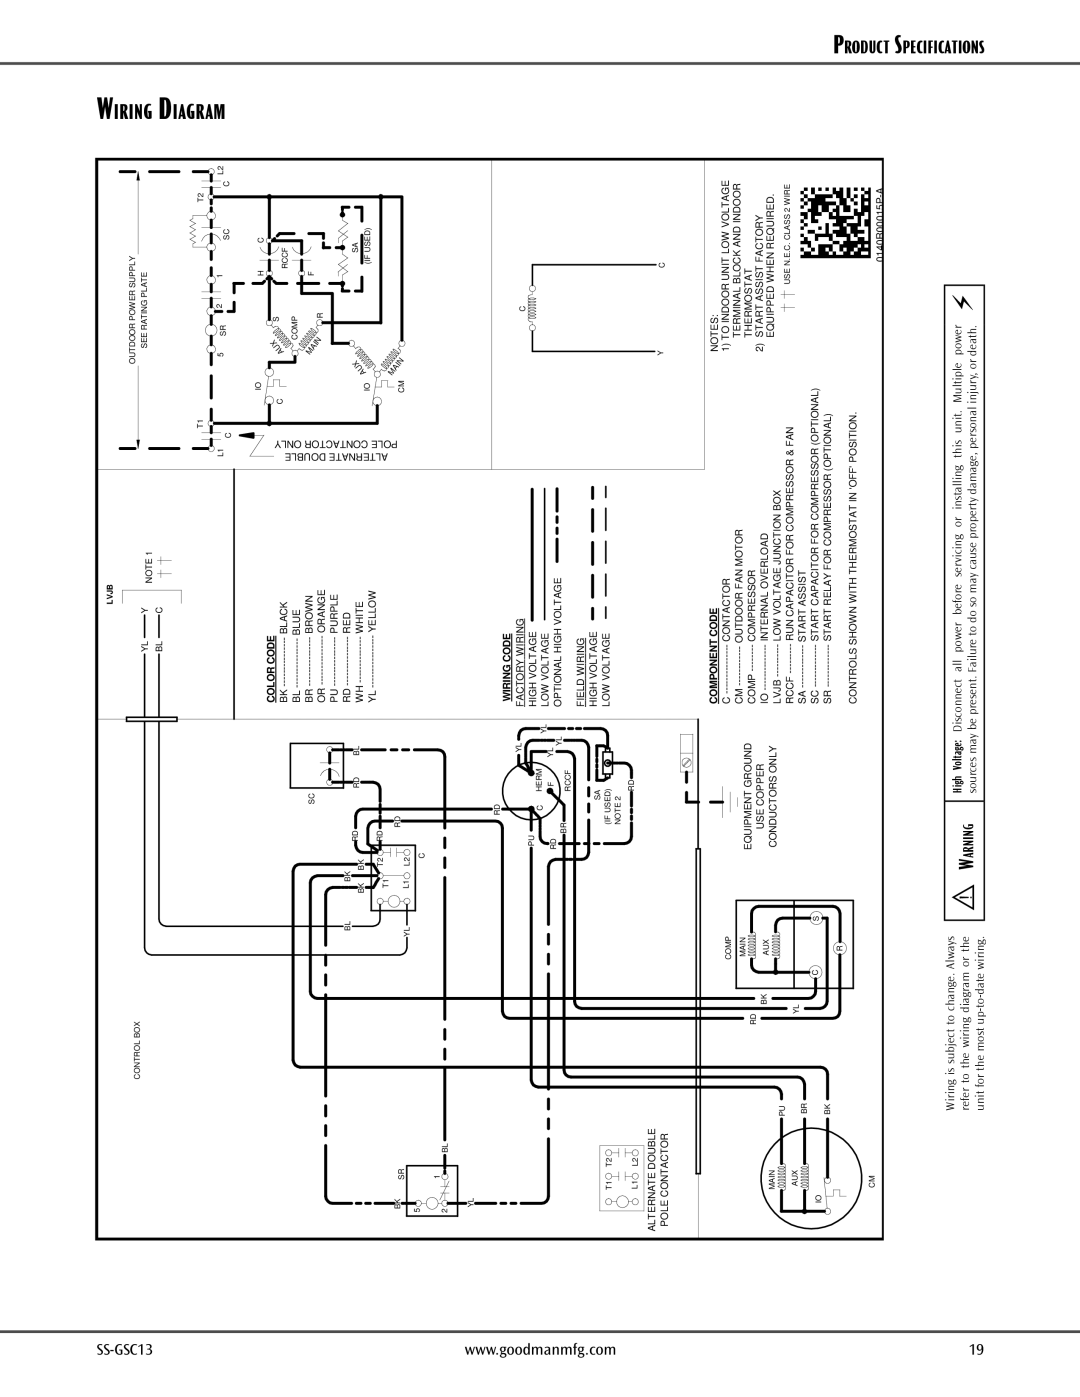 Goodman Mfg Split System Air Conditioner Product S, pecifications, refer to the wiring diagram or the, Color Code 